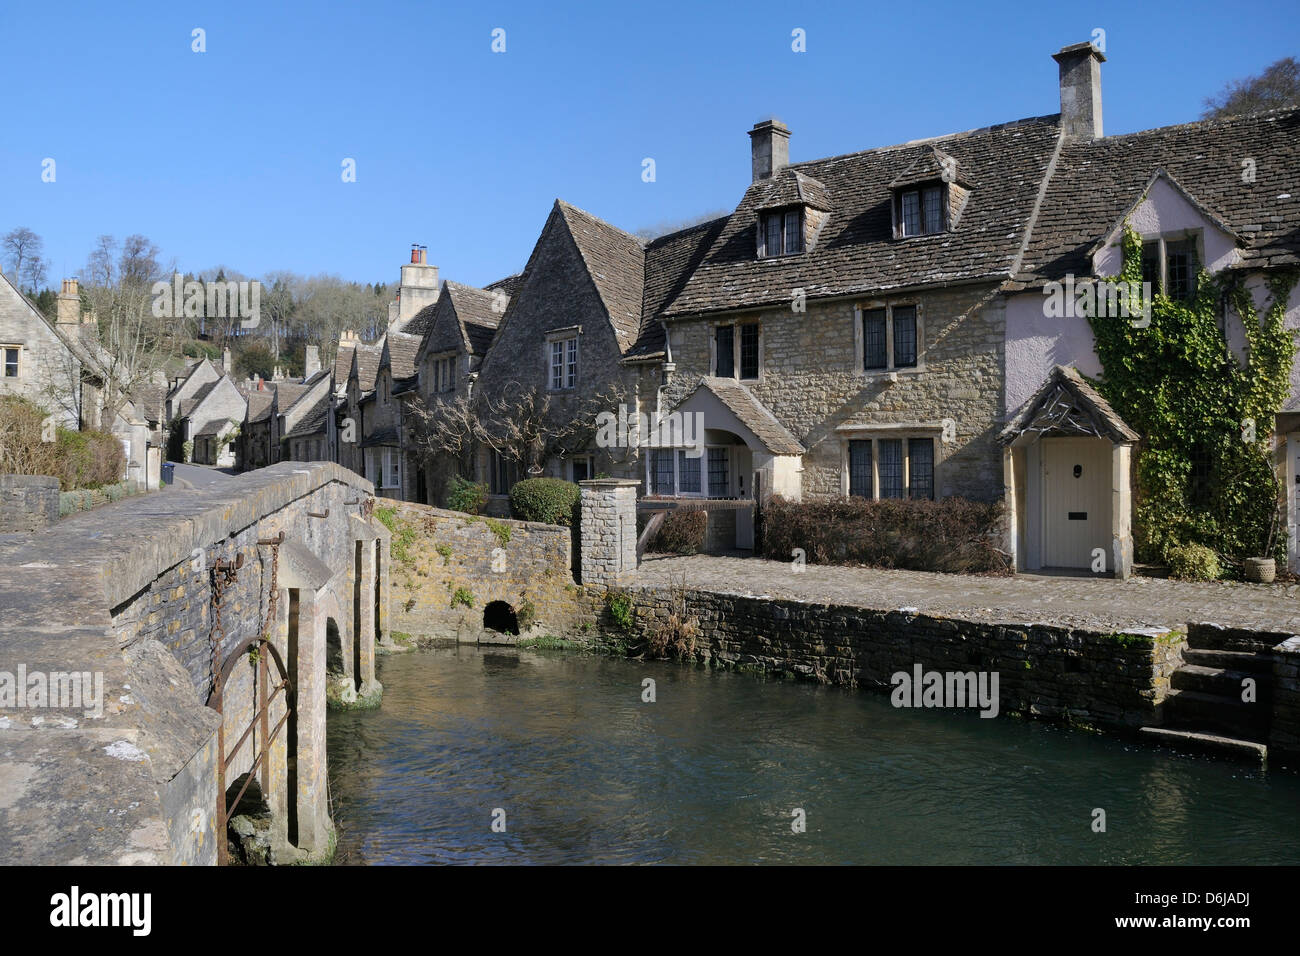 High Street and bridge over the Bybrook River, Castle Combe, Wiltshire, Engalnd, United Kingdom, Europe Stock Photo